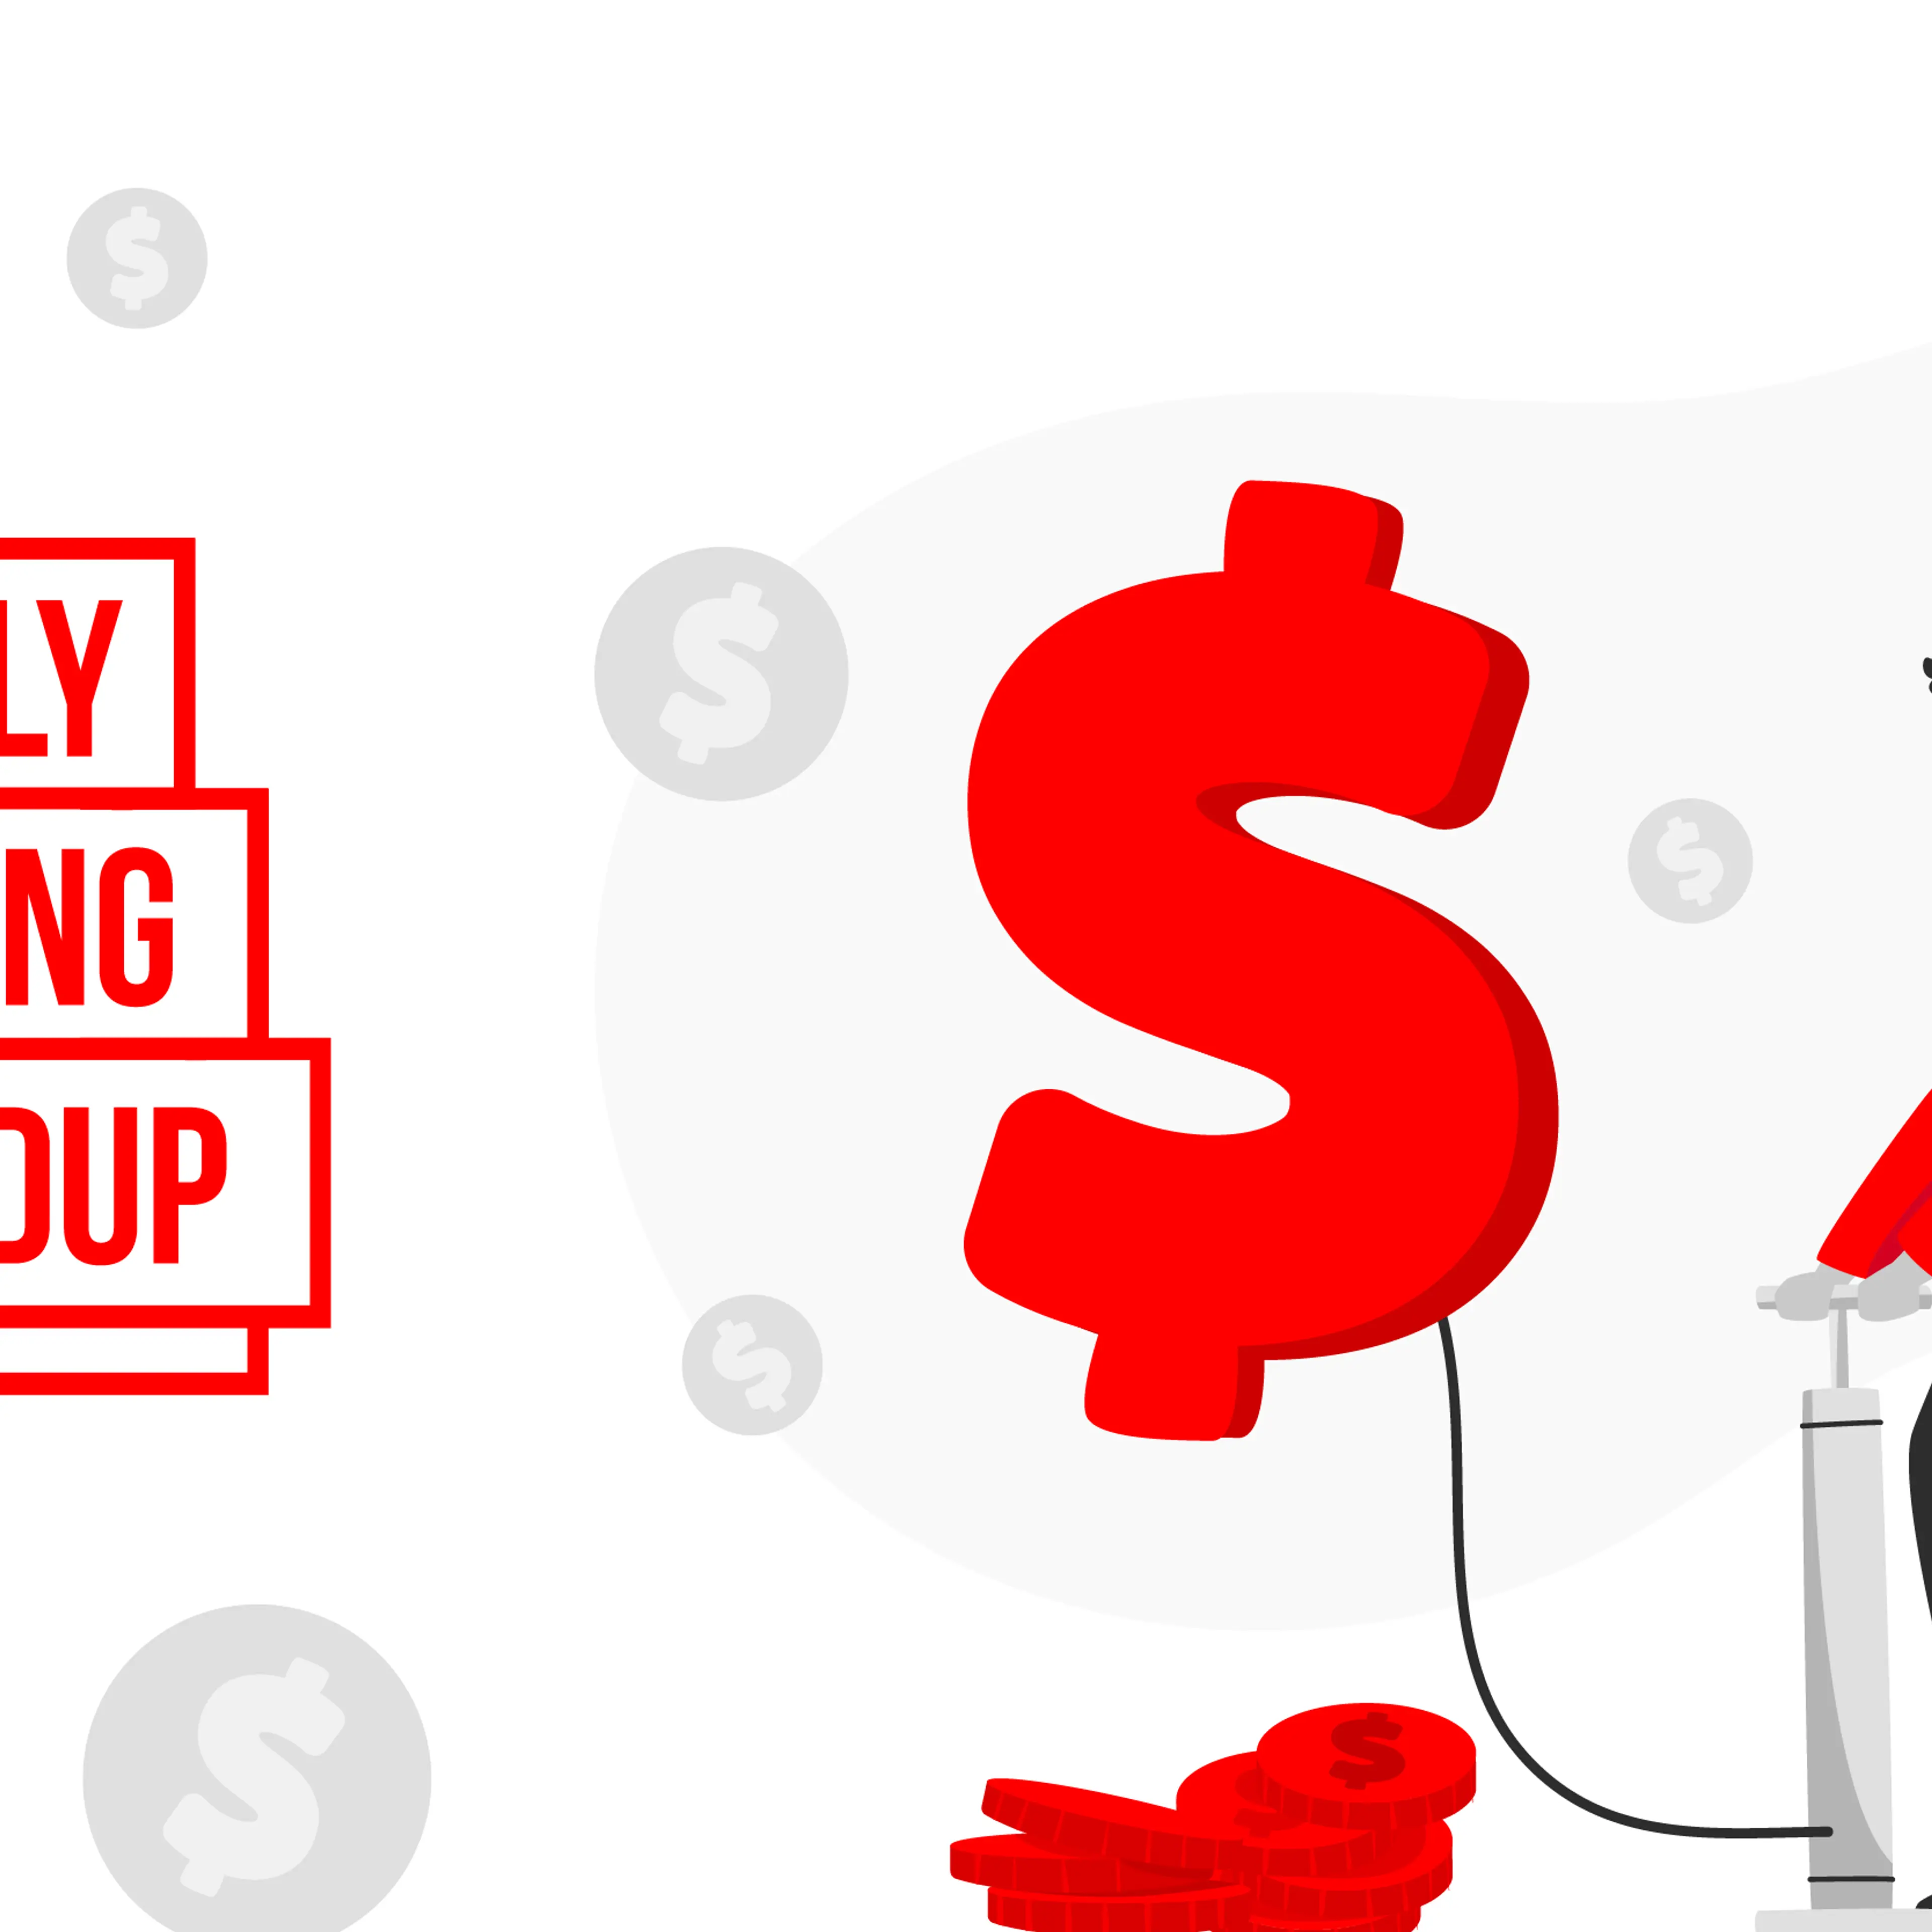 [Weekly funding roundup June 8-14] VC funding dips in the absence of large deals